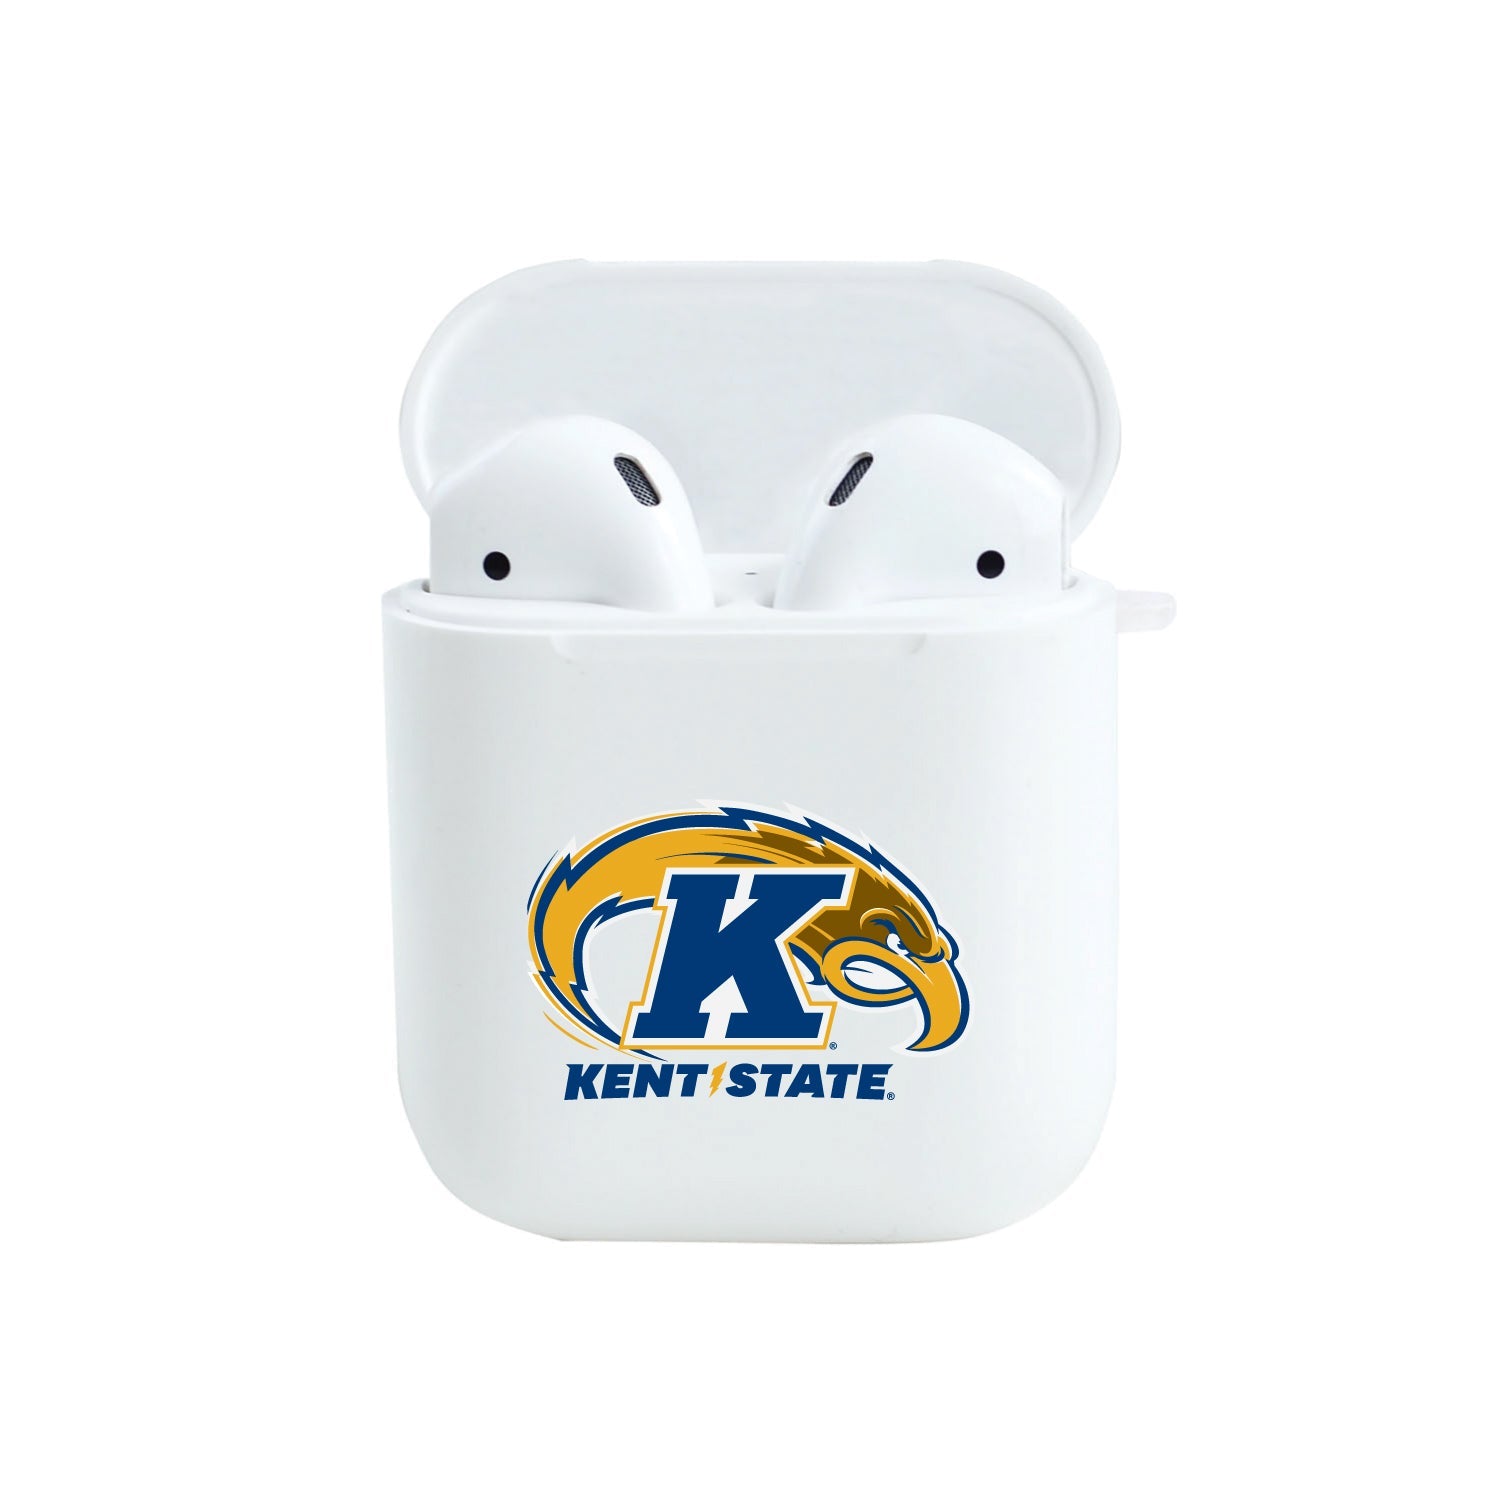 Kent State University - Airpod Case (TPU), Frosted White, Classic